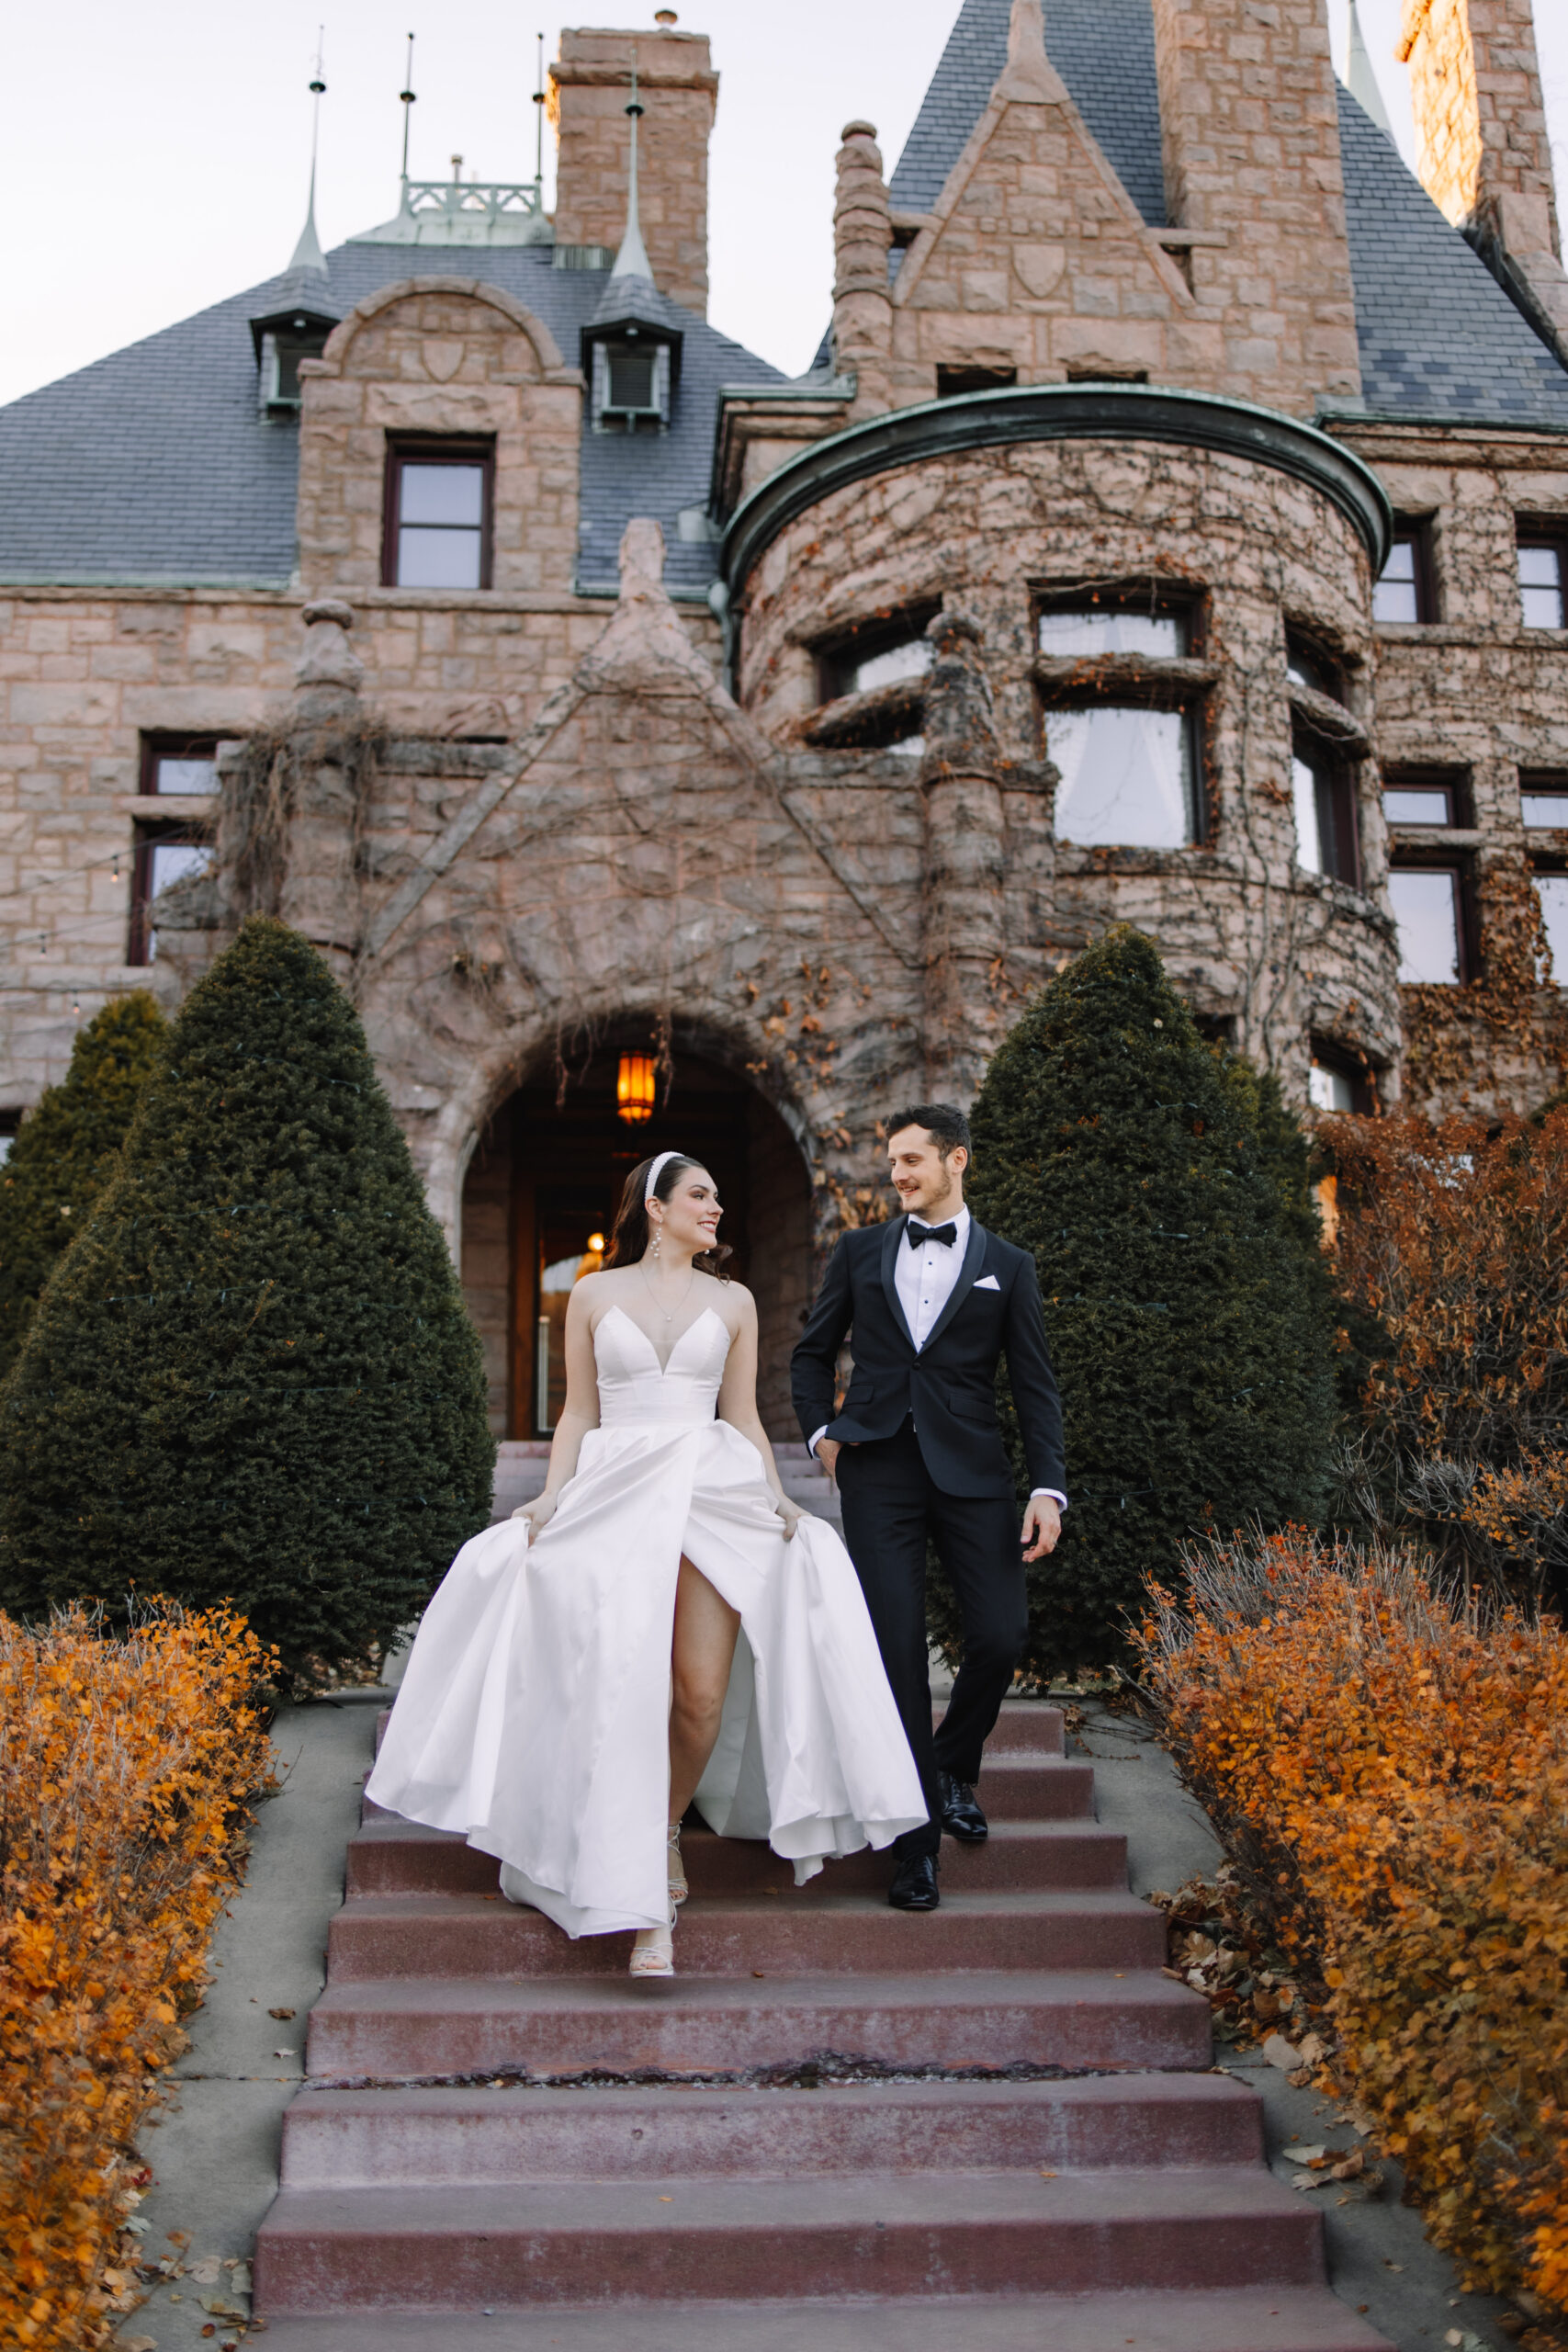 A bride in a white dress and a groom in a black tuxedo walking down the steps of an ornate castle-like building. Her dress from a wedding dress shop in minneapolis 